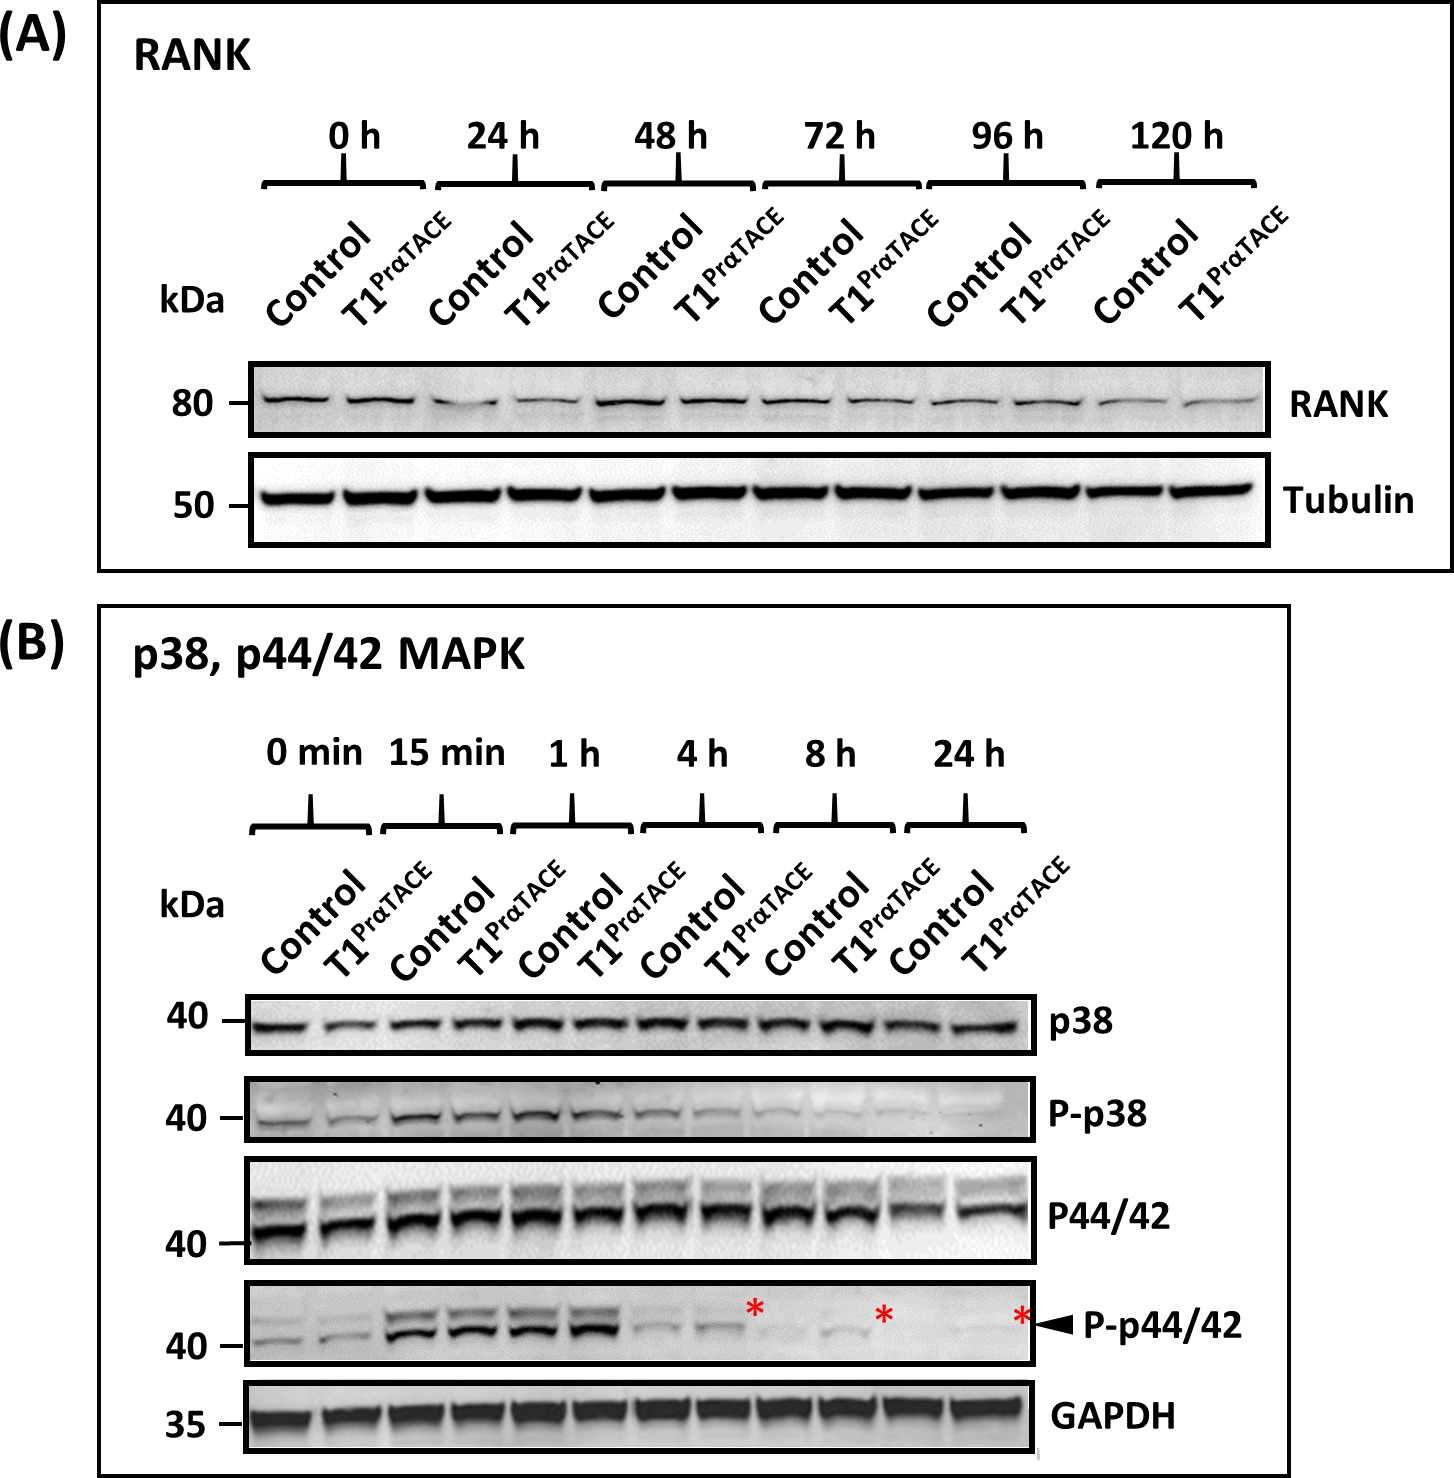 Fig. 8 
            Selective and sustained activation of p44/42 mitogen-activated protein kinase (MAPK) in T1PrαTACE cells in response to receptor activator of nuclear factor kappa-Β ligand (RANKL) induction. a) T1PrαTACE had a negligible effect on the protein expression of RANK throughout the process of osteoclastogenesis. b) Selective and sustained activation of p44/42 MAPK in T1PrαTACE cells. Note the residual expression of phosphorylated p44/42 (highlighted by asterisk *), but not p38 MAPK, in T1PrαTACE cells even after 24 hours of induction. P-p38 and P-p44/42 denote the phosphorylated forms of p38 and p44/42 MAPKs, respectively.
          